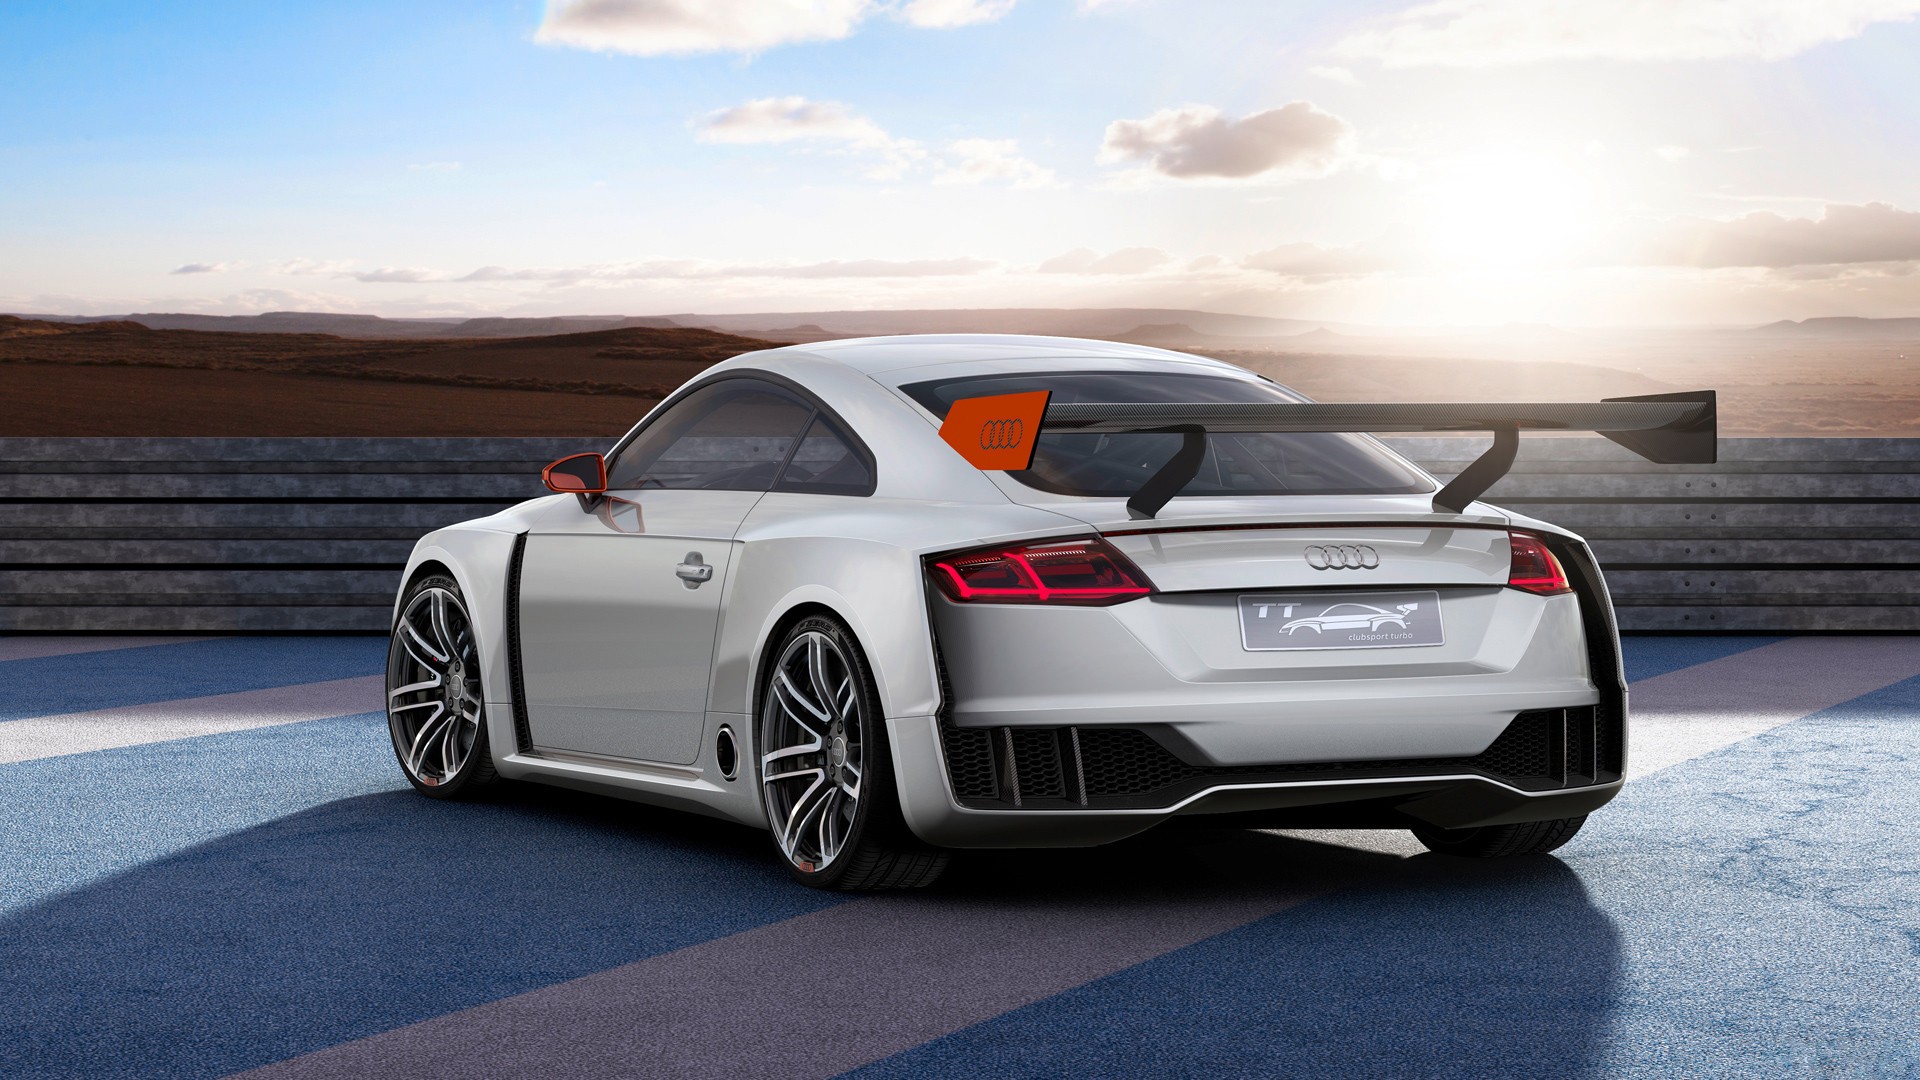 General 1920x1080 Audi TT car concept cars vehicle silver cars white cars Audi German cars Volkswagen Group